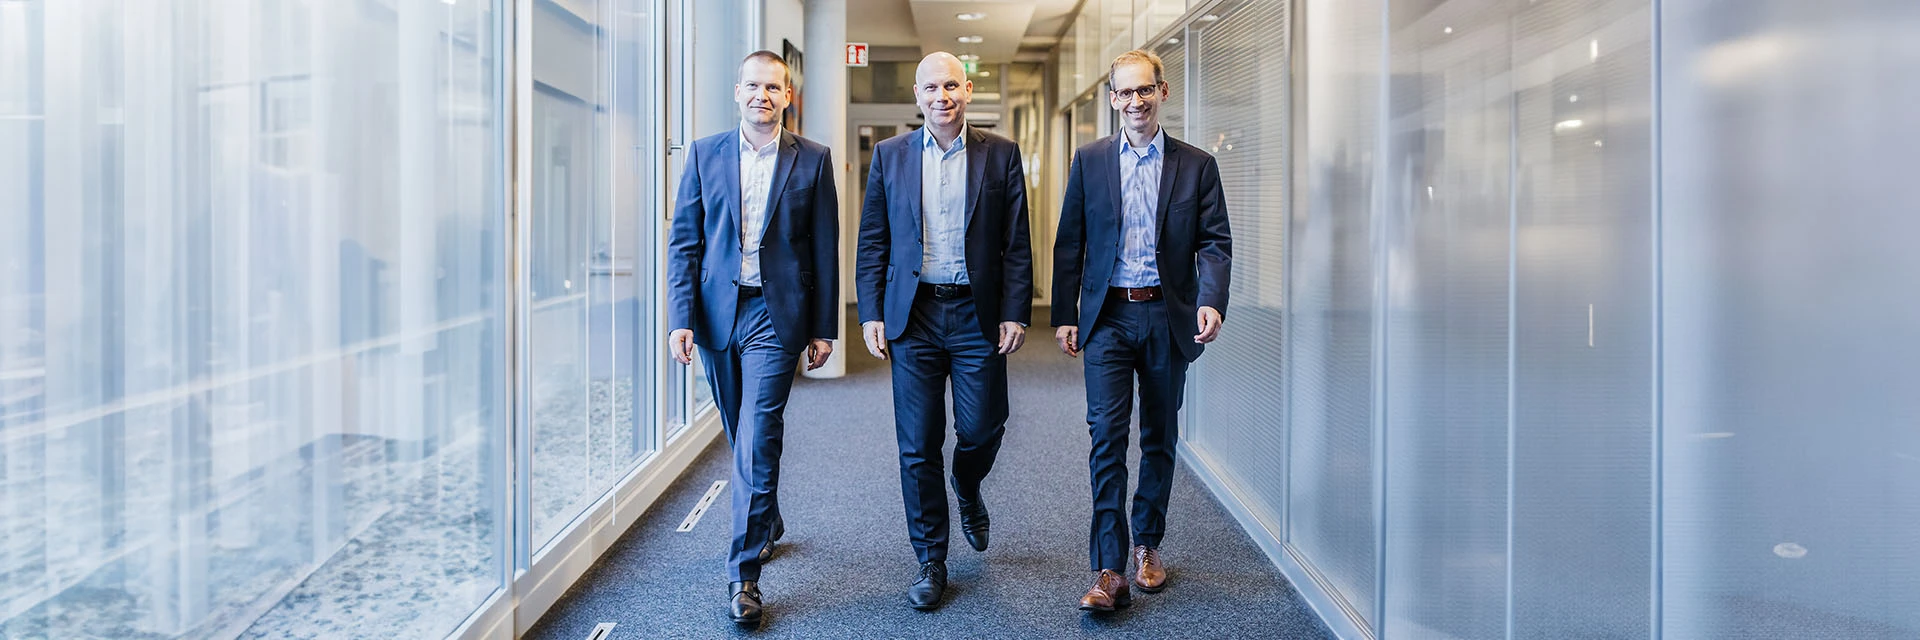 The investor relations team of the Dürr Group